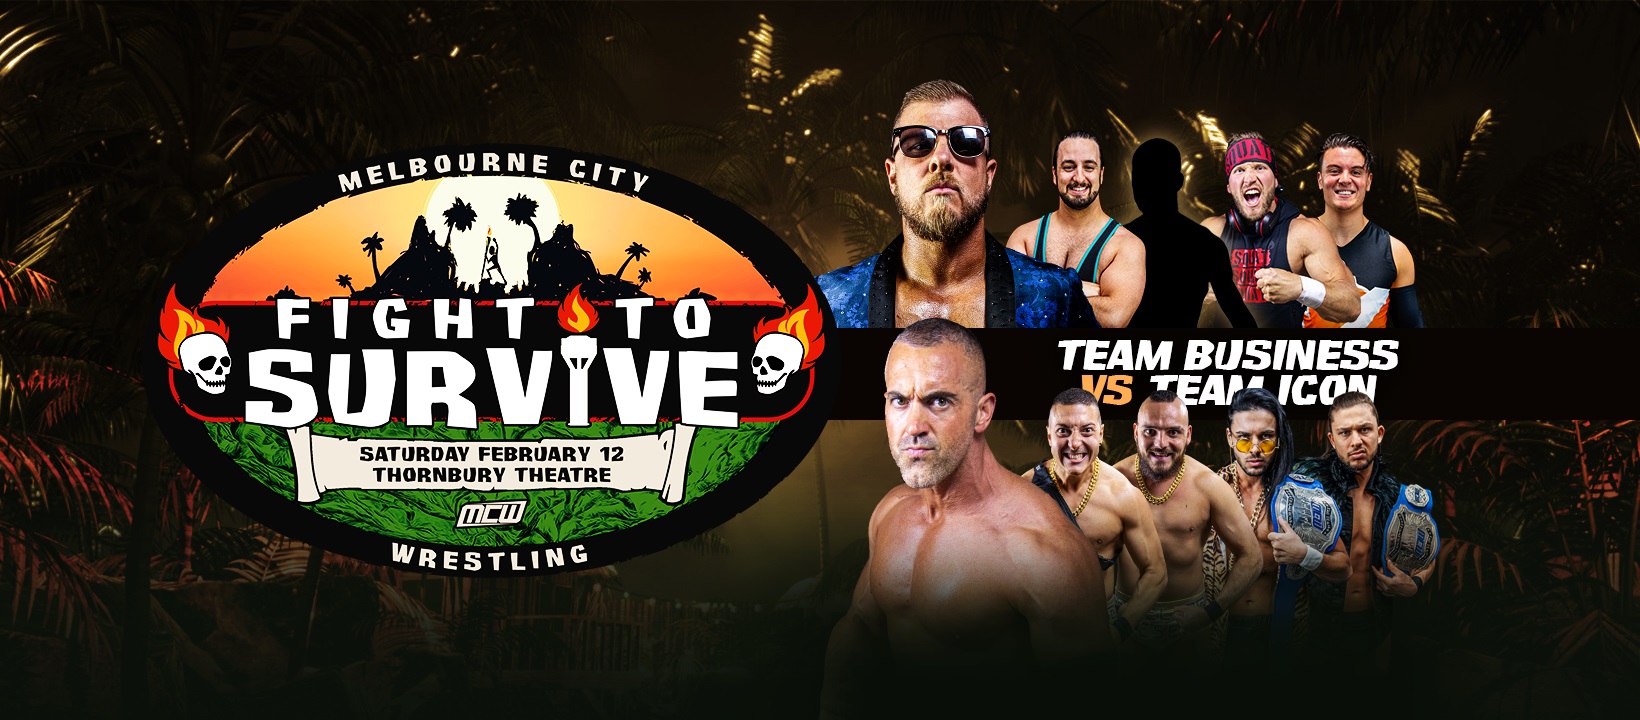 FIGHT TO SURVIVE – DATE CHANGE